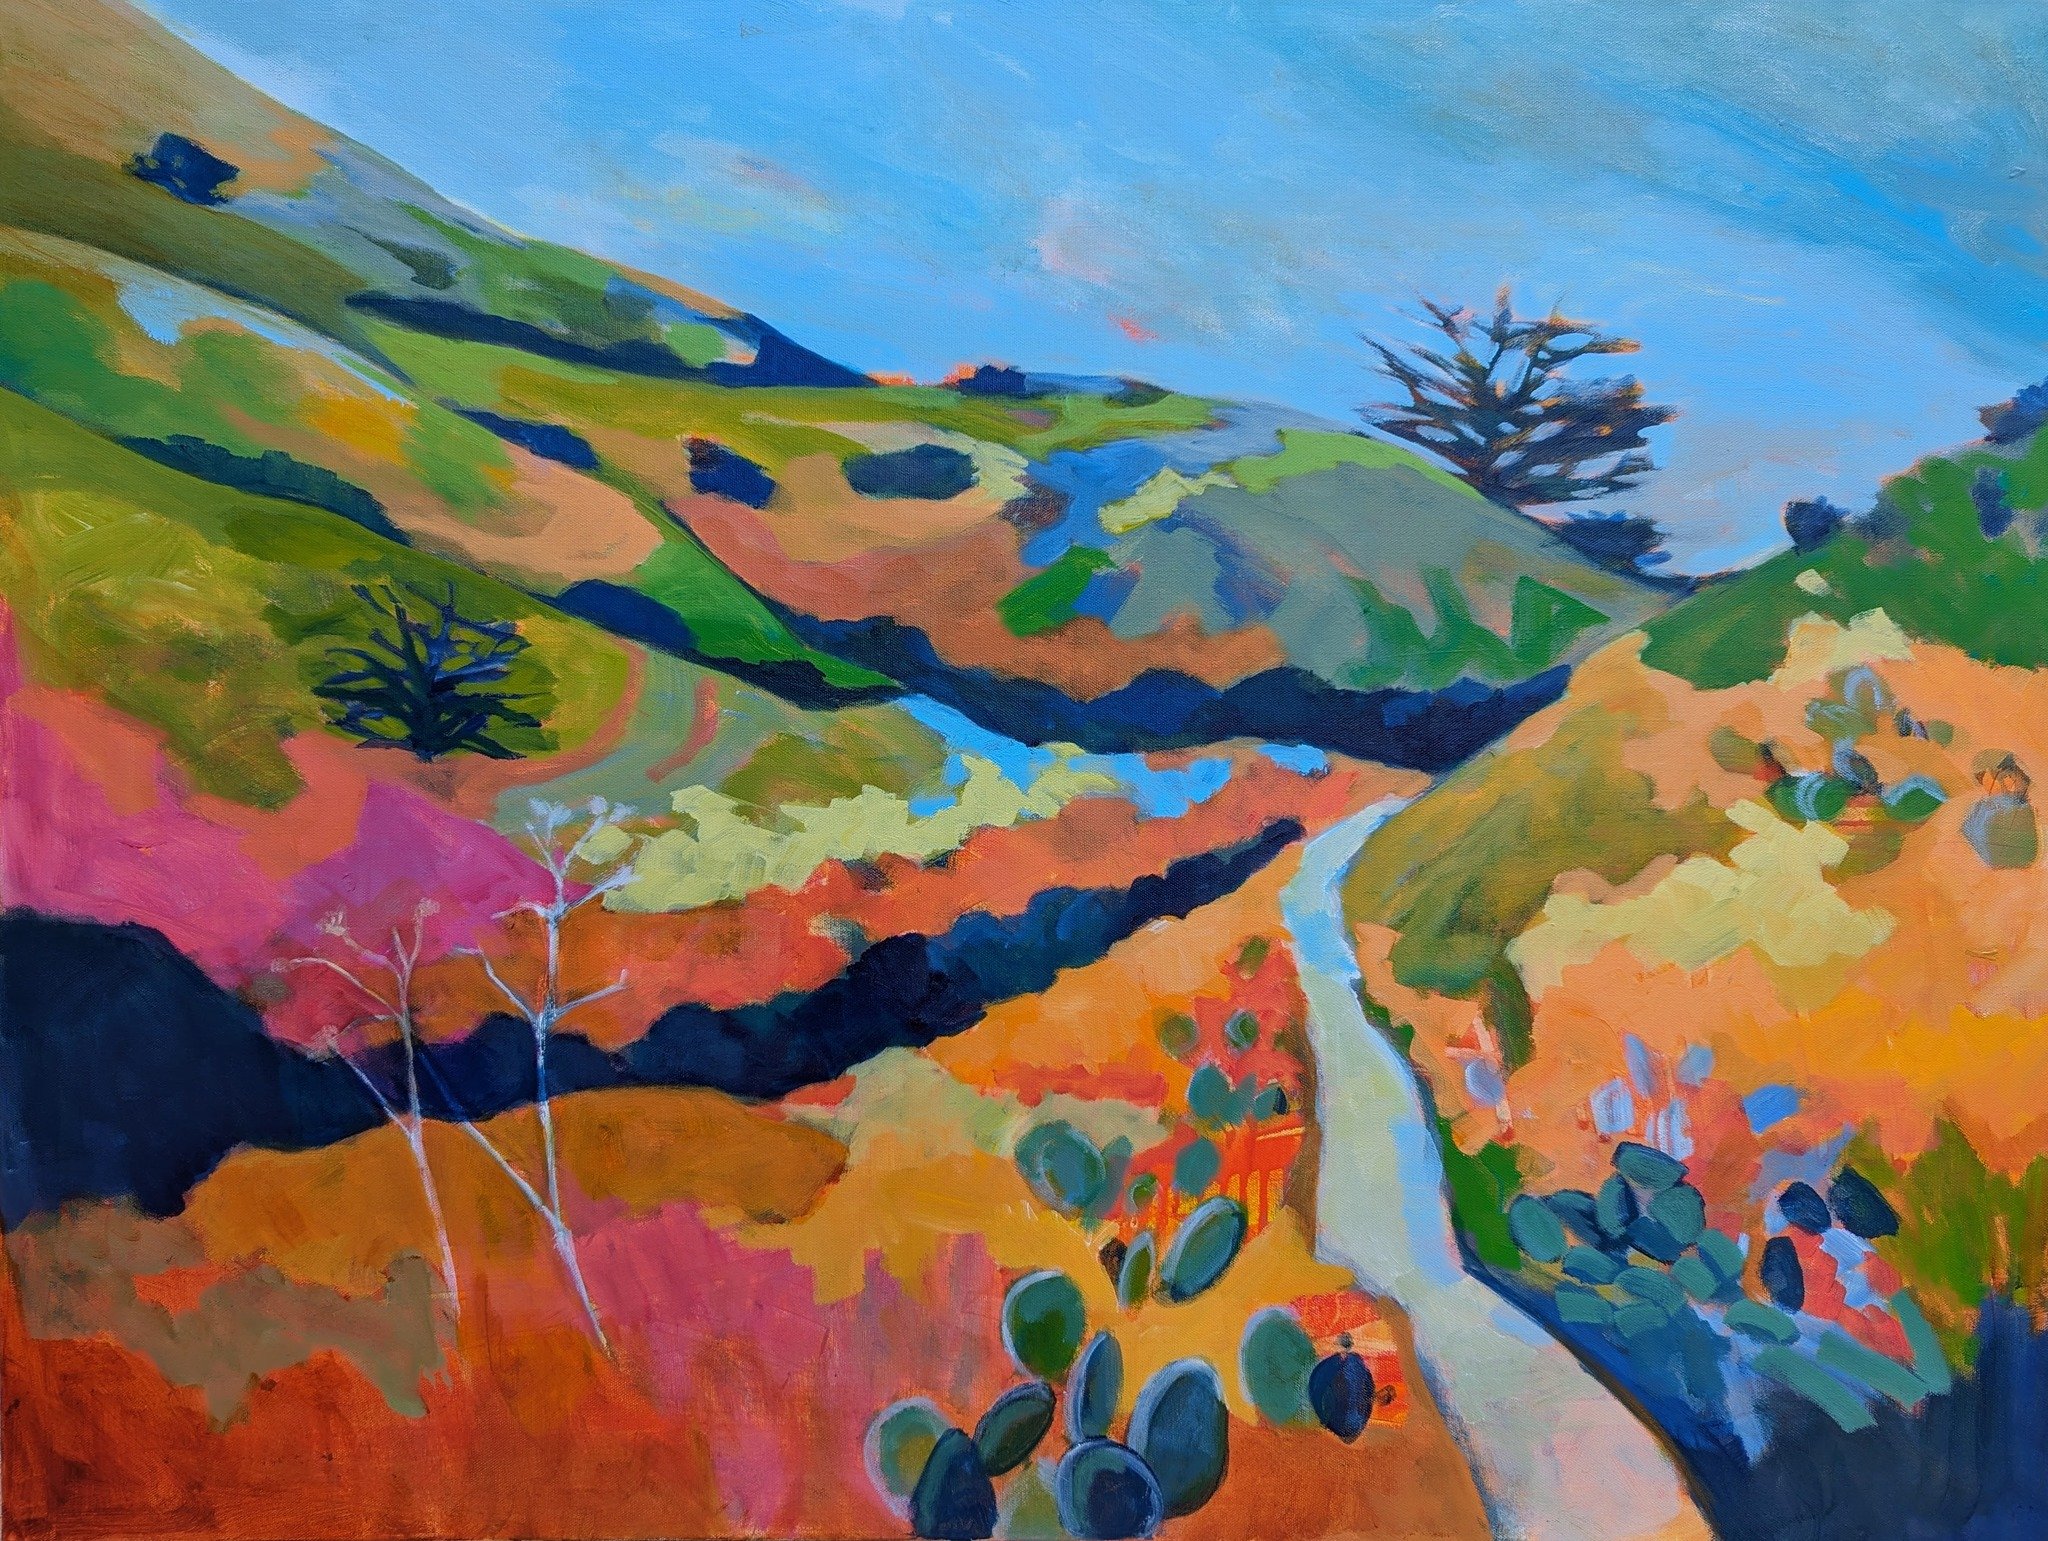 Still working on this new piece inspired by a beautiful canyon hike this Spring in Big Sur. Should be finished in time for Spring shows coming up May 4/5 and 11/12.